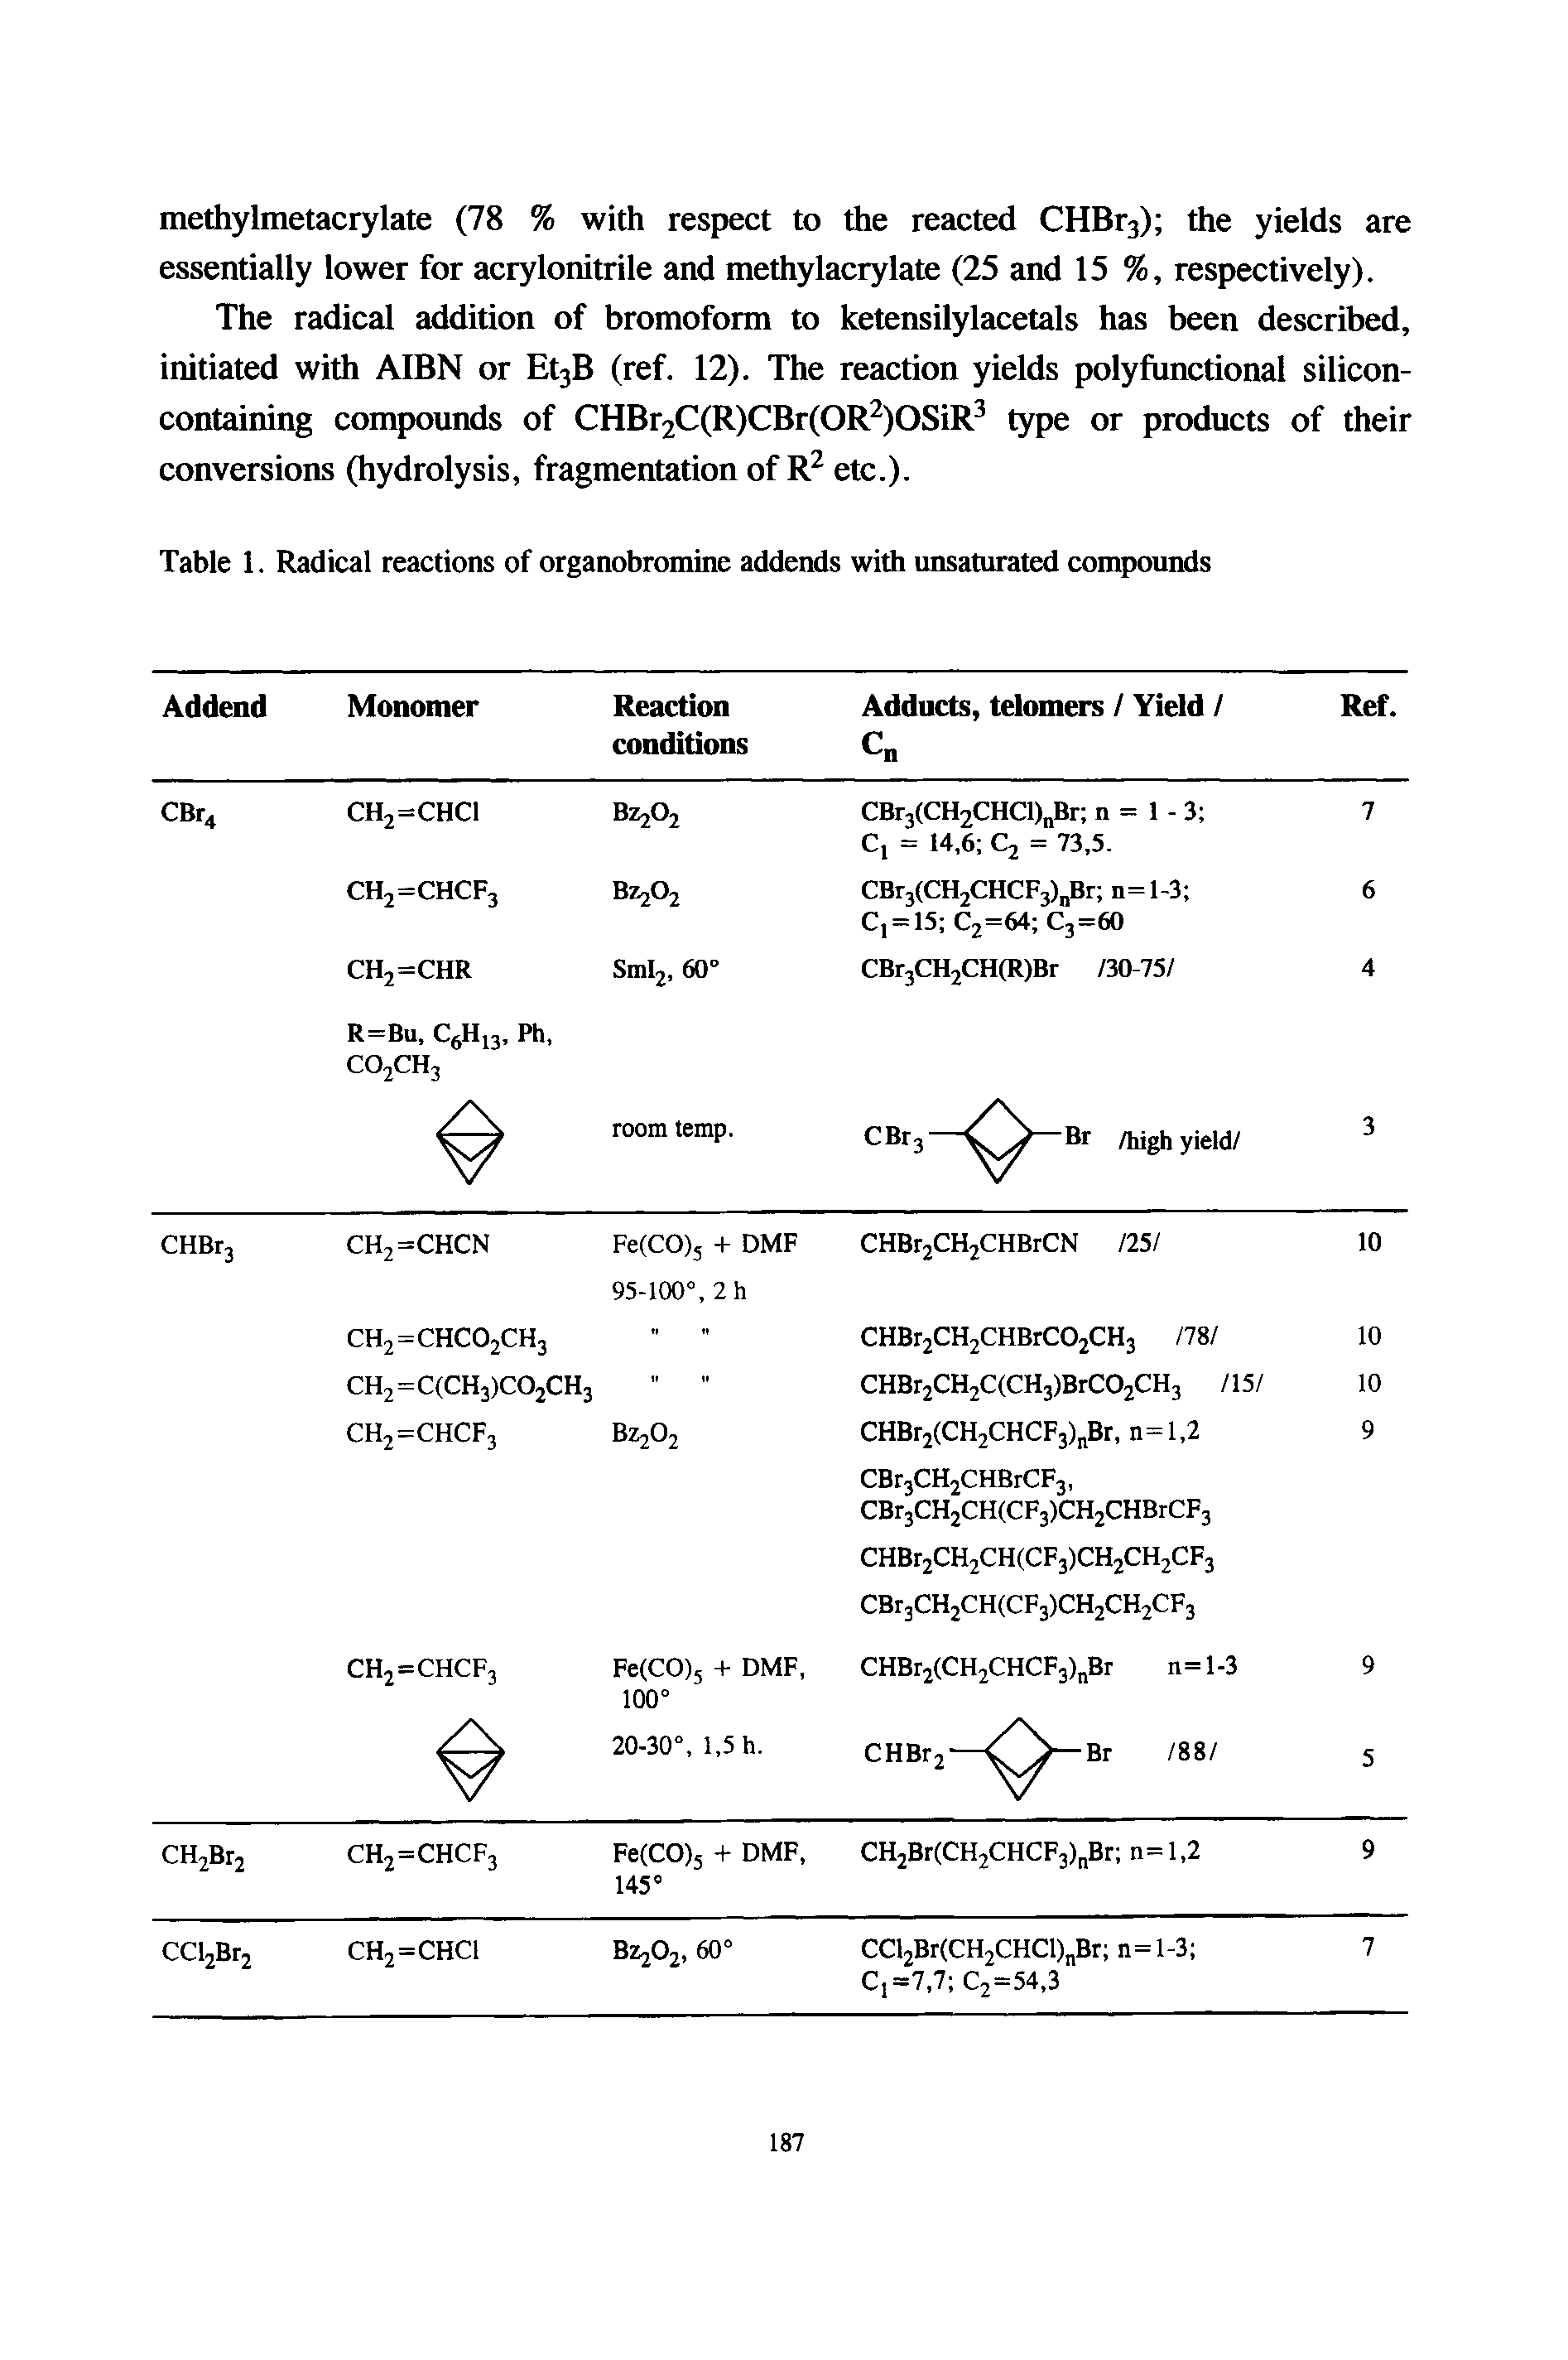 Table 1. Radical reactions of organobrominc addends with unsaturated compounds...